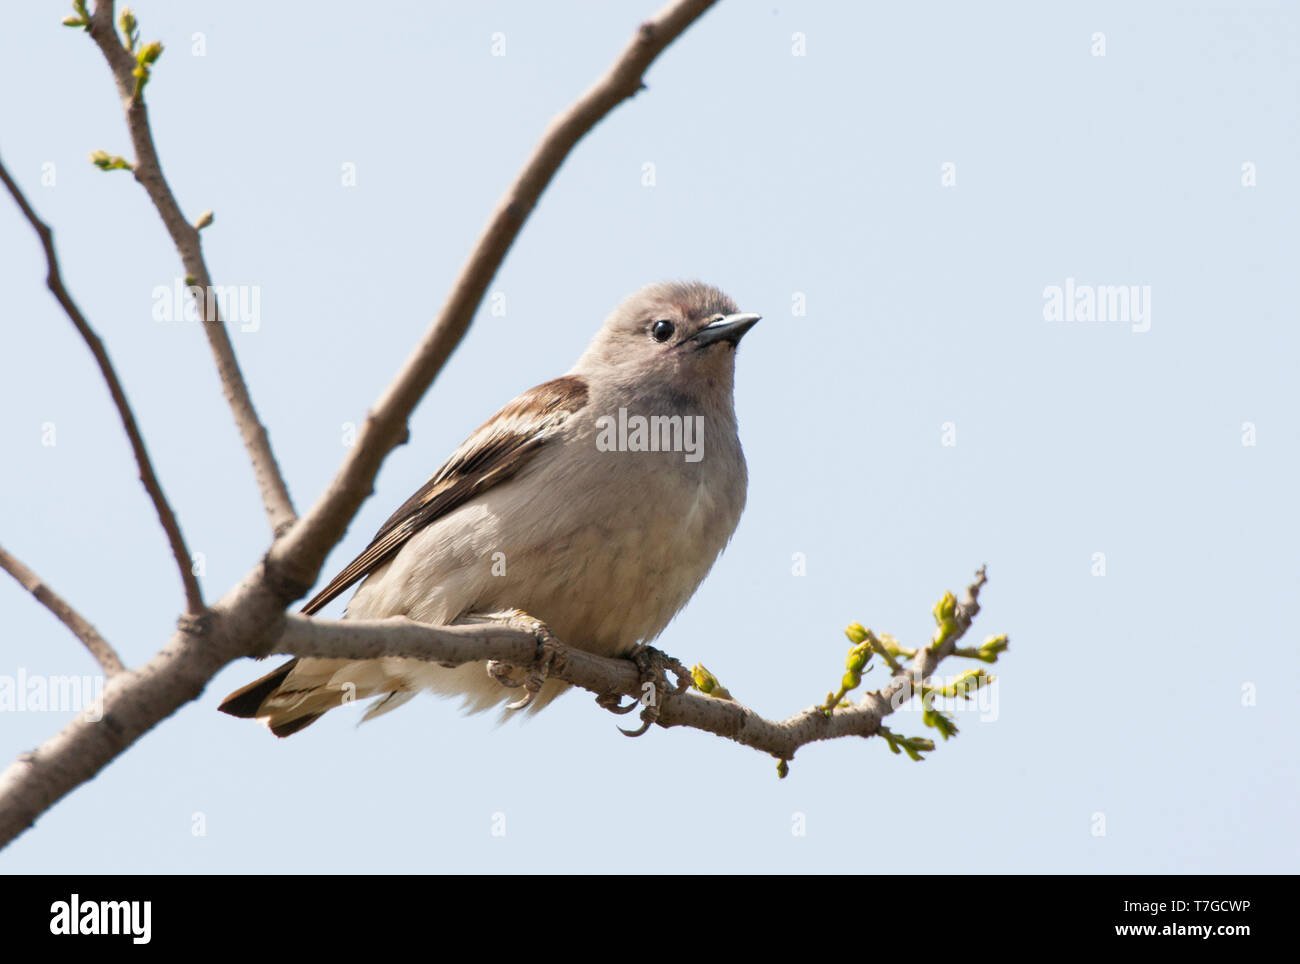 Daurian starling in a tree Stock Photo